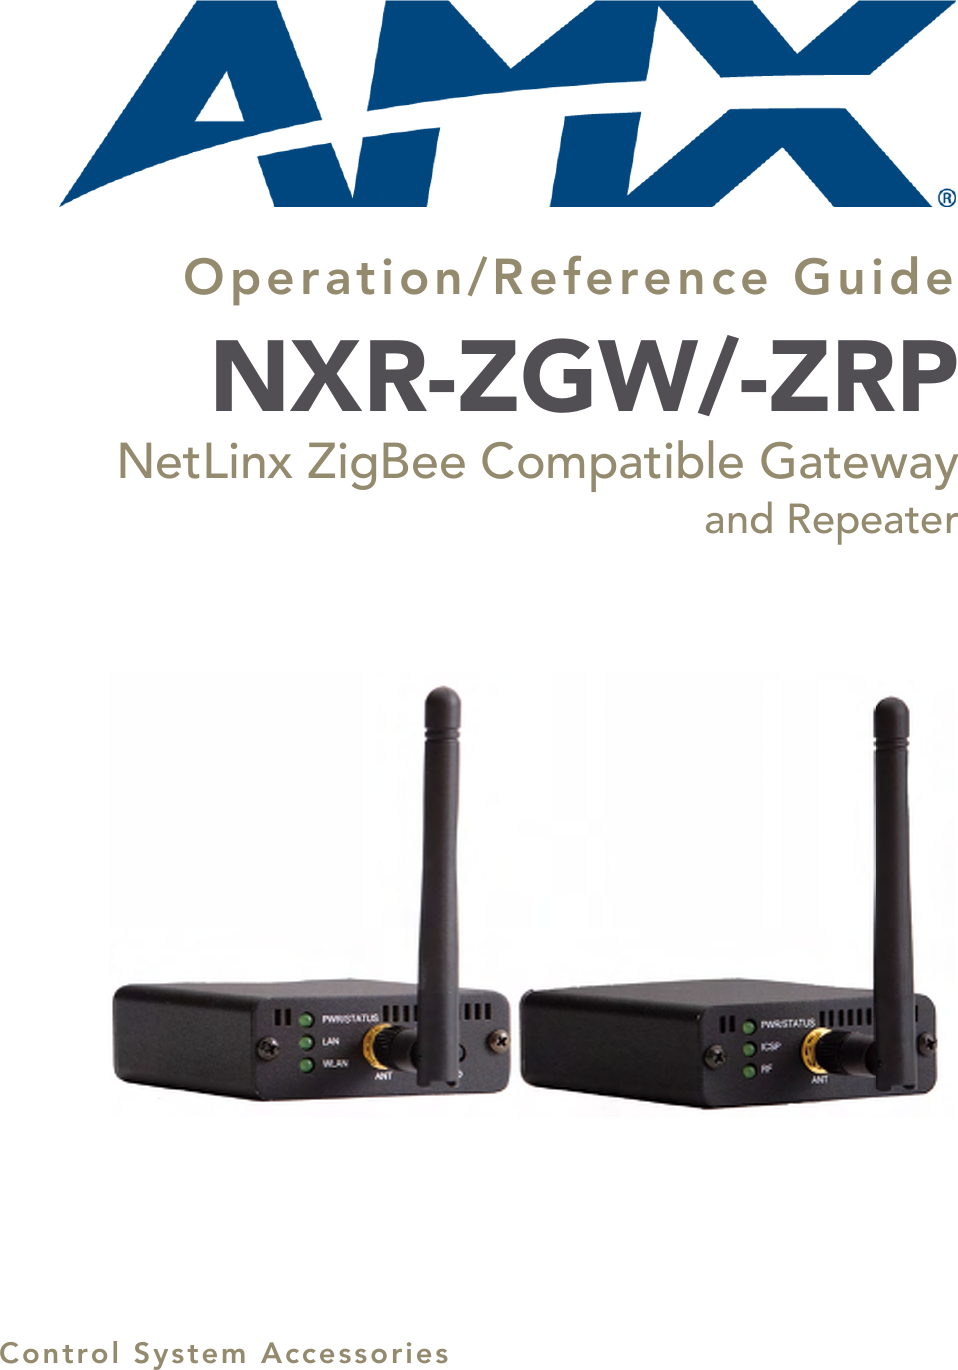 Operation/Reference GuideControl System AccessoriesNXR-ZGW/-ZRPNetLinx ZigBee Compatible Gatewayand Repeater